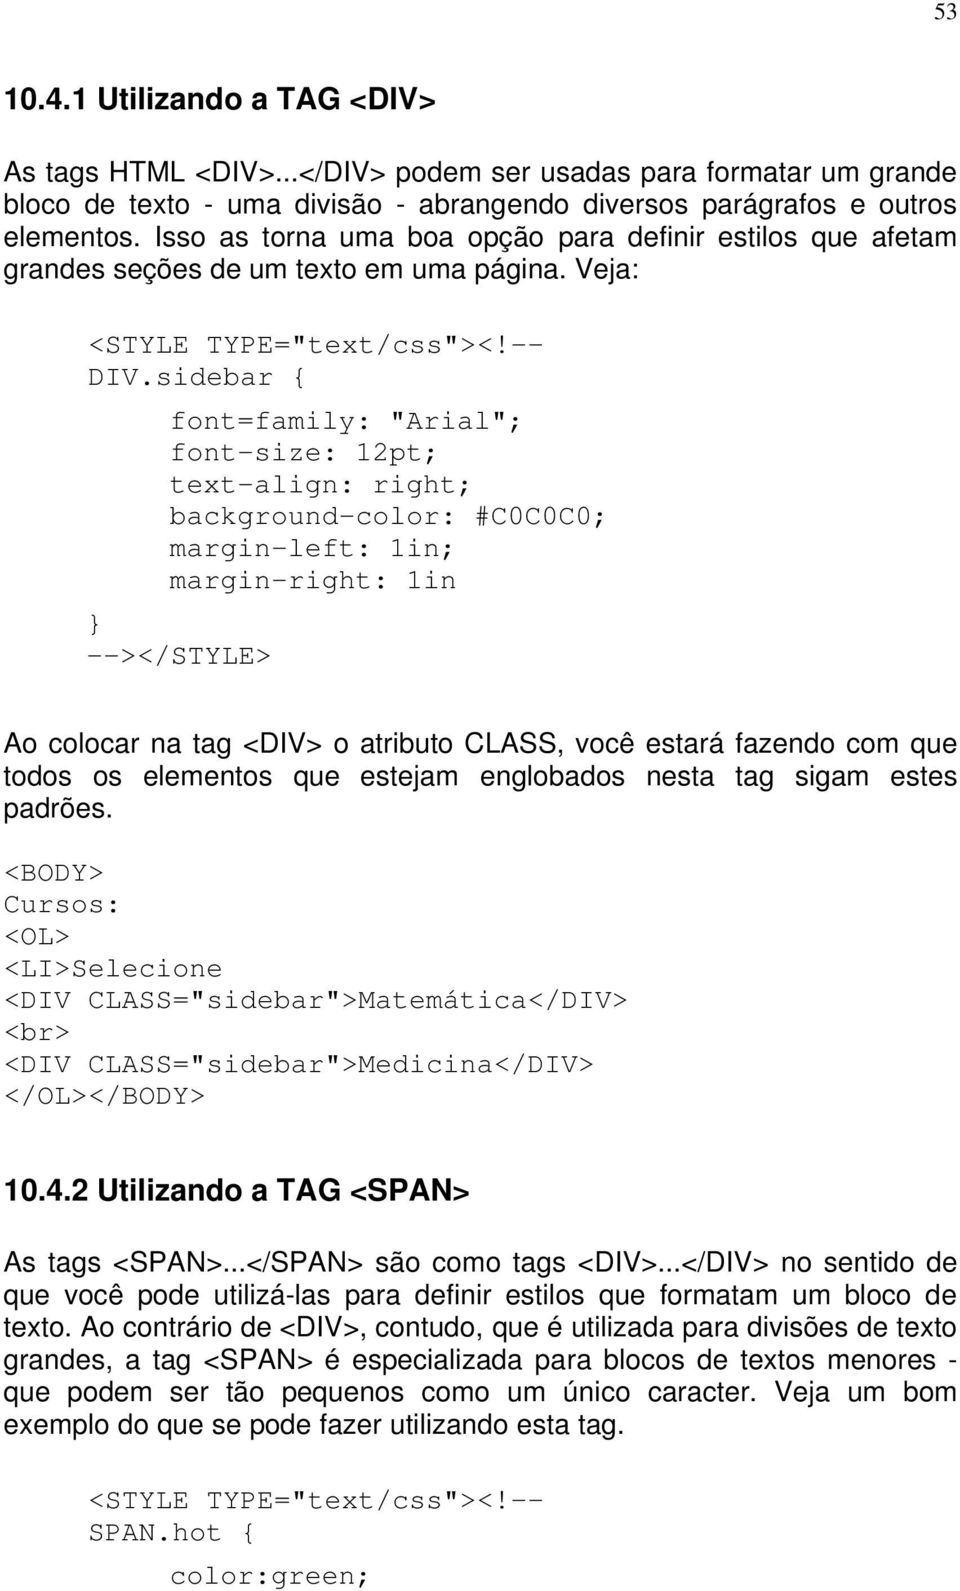 sidebar { font=family: "Arial"; font-size: 12pt; text-align: right; background-color: #C0C0C0; margin-left: 1in; margin-right: 1in } --></STYLE> Ao colocar na tag <DIV> o atributo CLASS, você estará